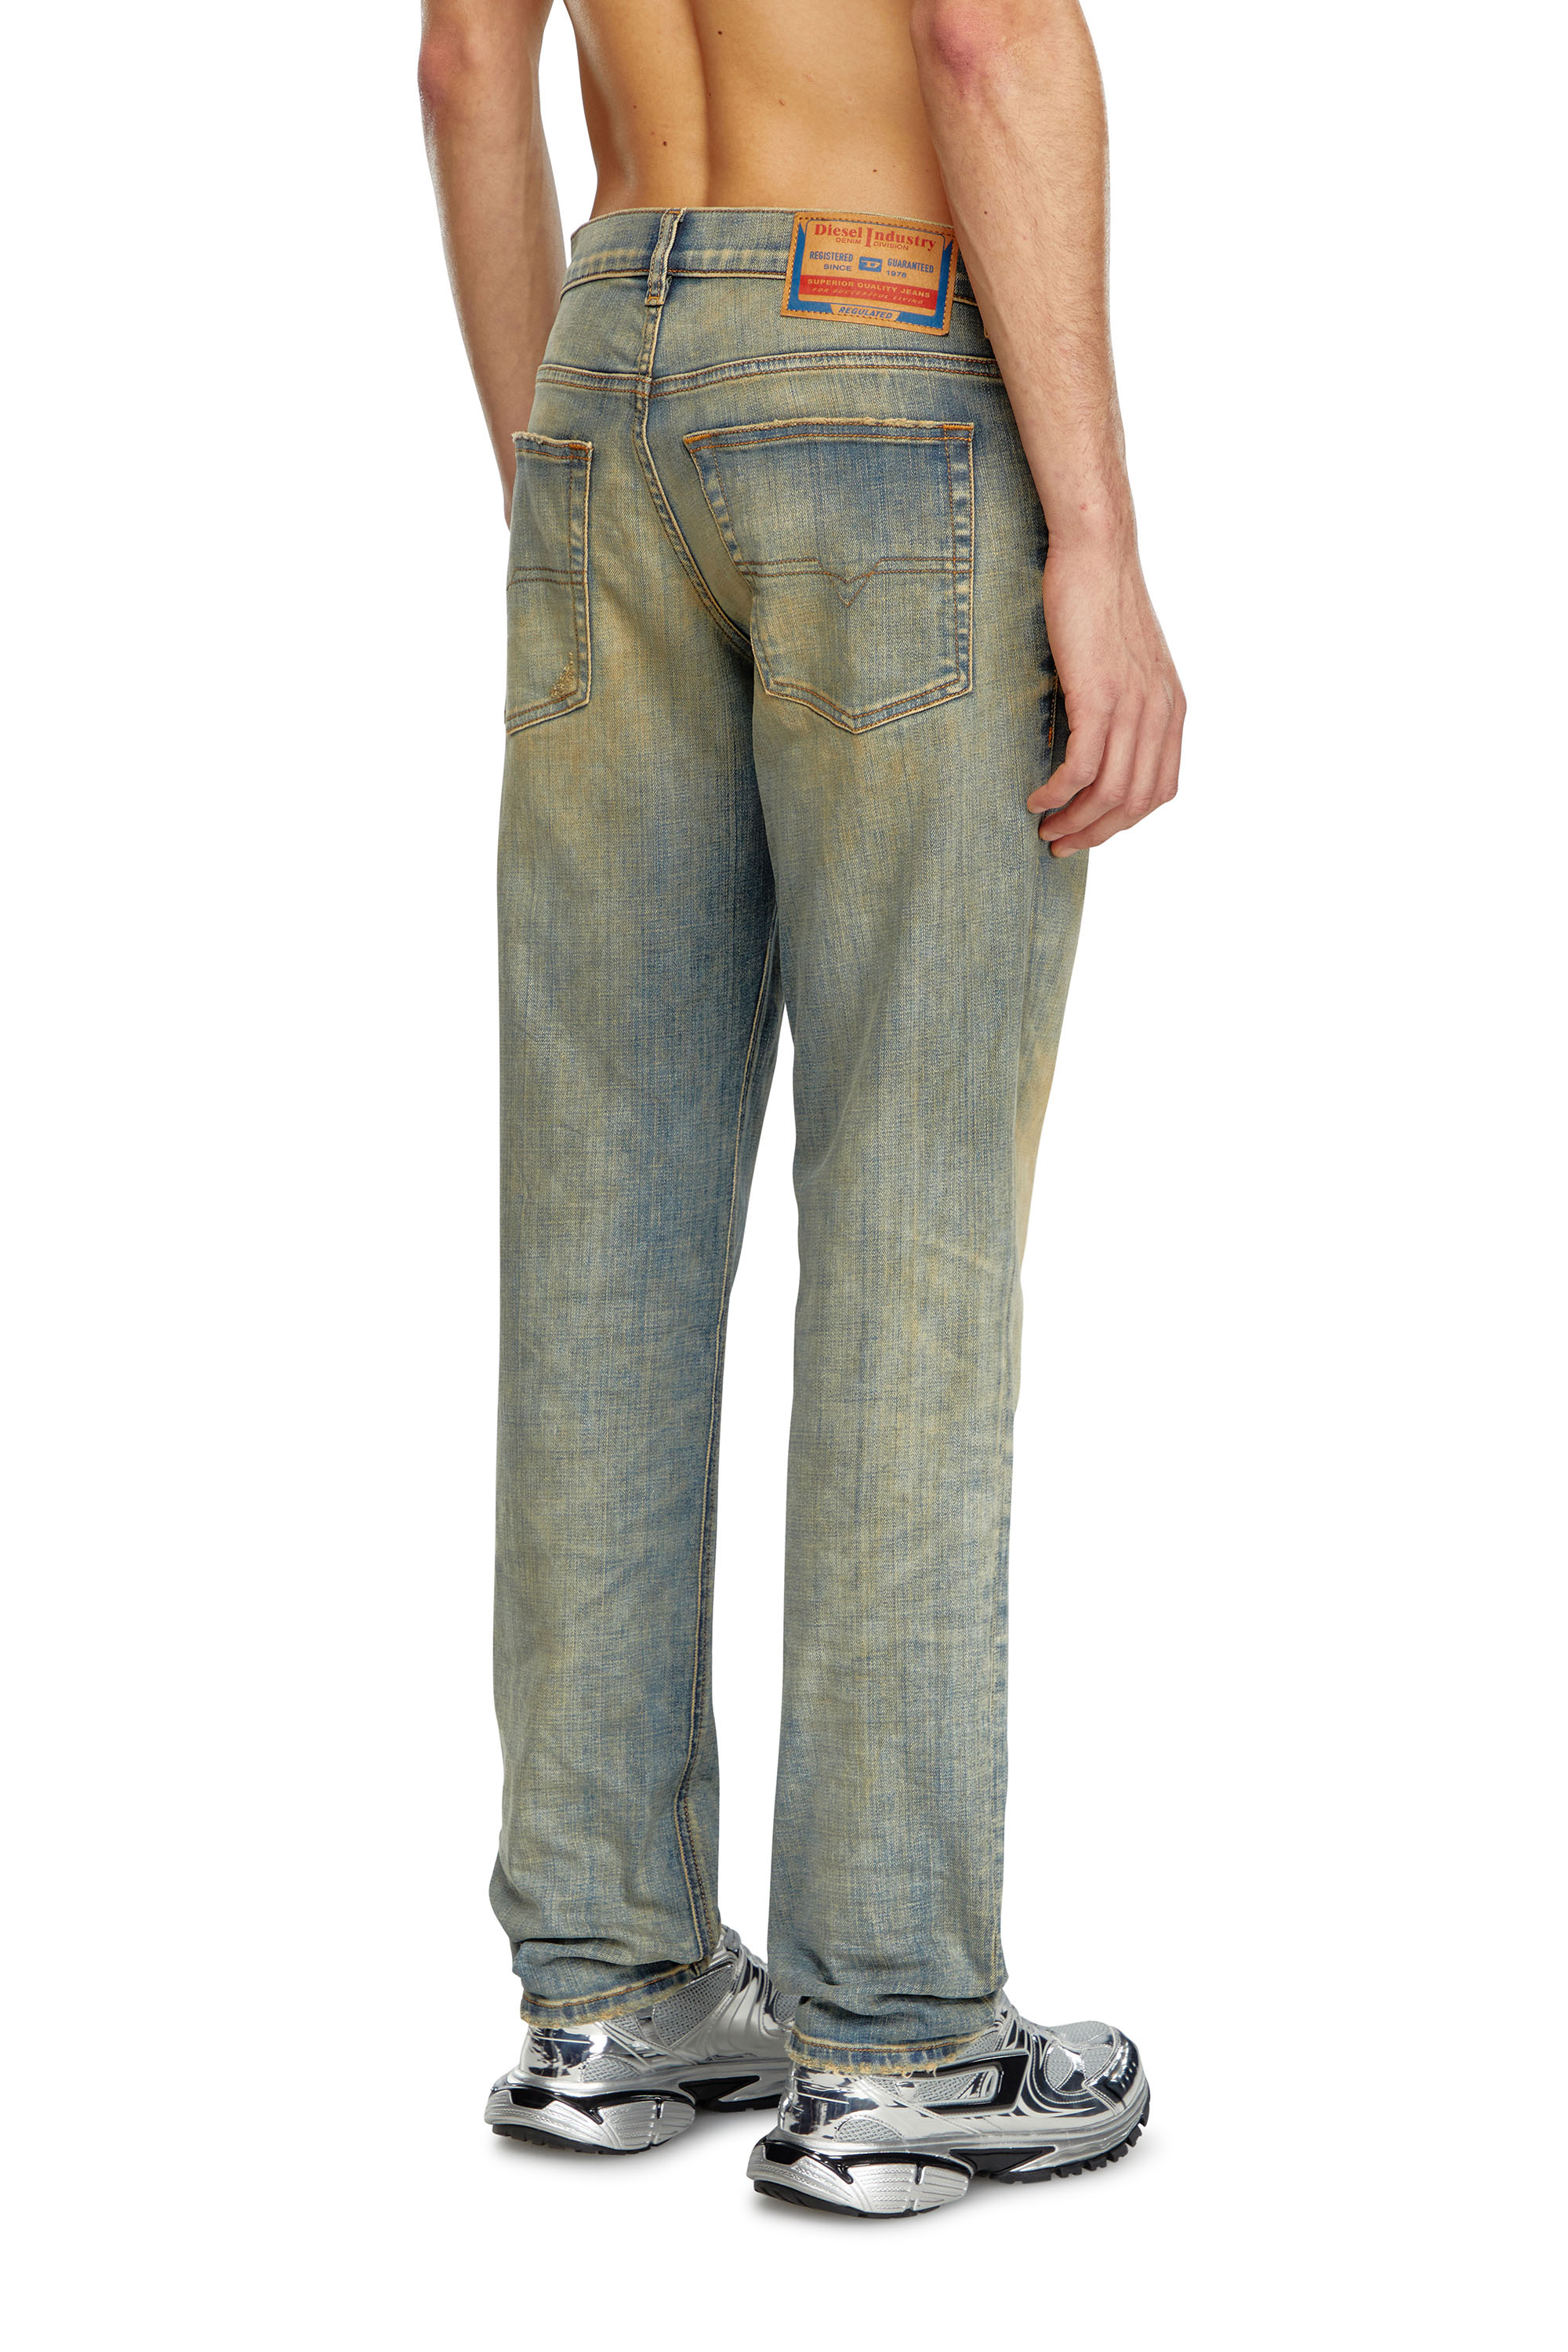 Diesel - Tapered Jeans 2023 D-Finitive 09J51, Hombre Tapered Jeans - 2023 D-Finitive in Azul marino - Image 4